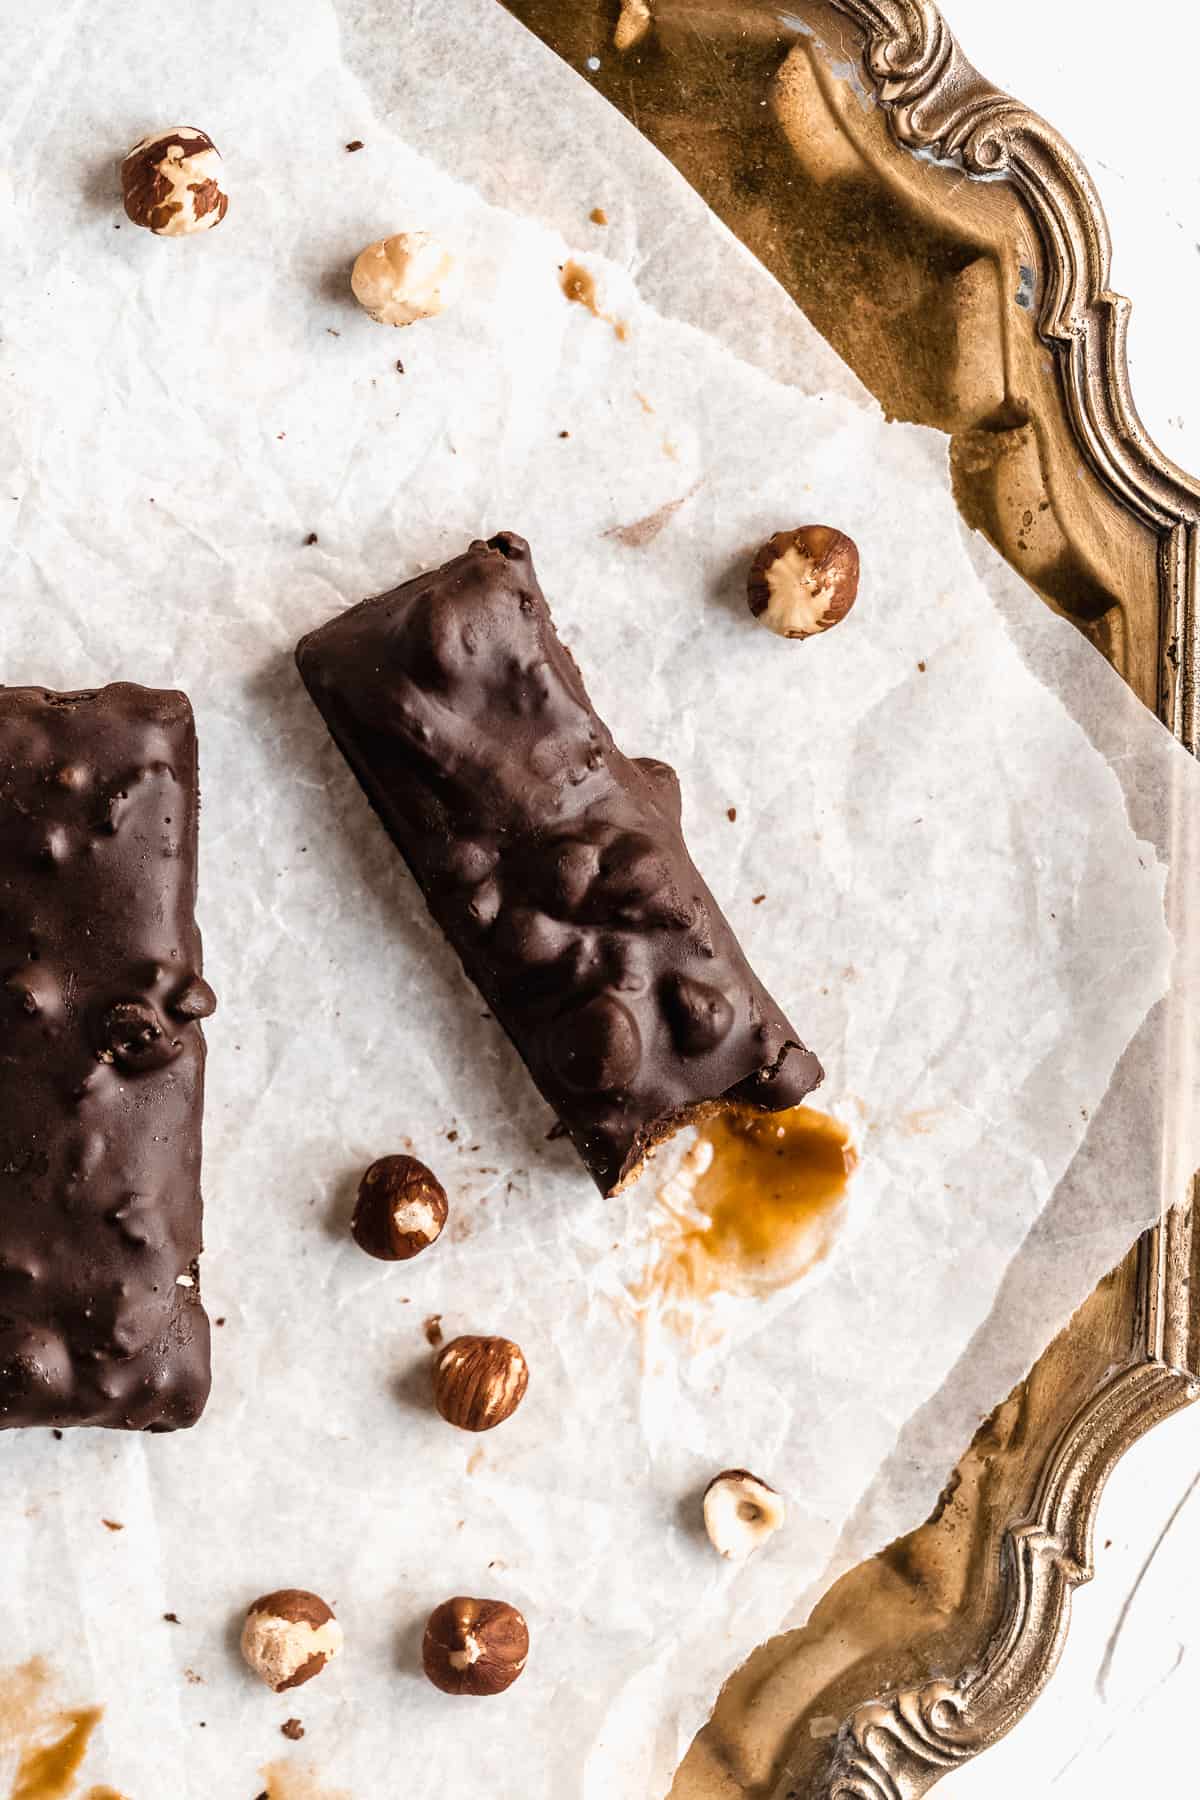 Overhead photo of two Vegan Hazelnut Snicker Bars sitting on parchment paper on a vintage silver tray.  A bite has been taken out of one bar.  Additional hazelnuts are sprinkled around.  